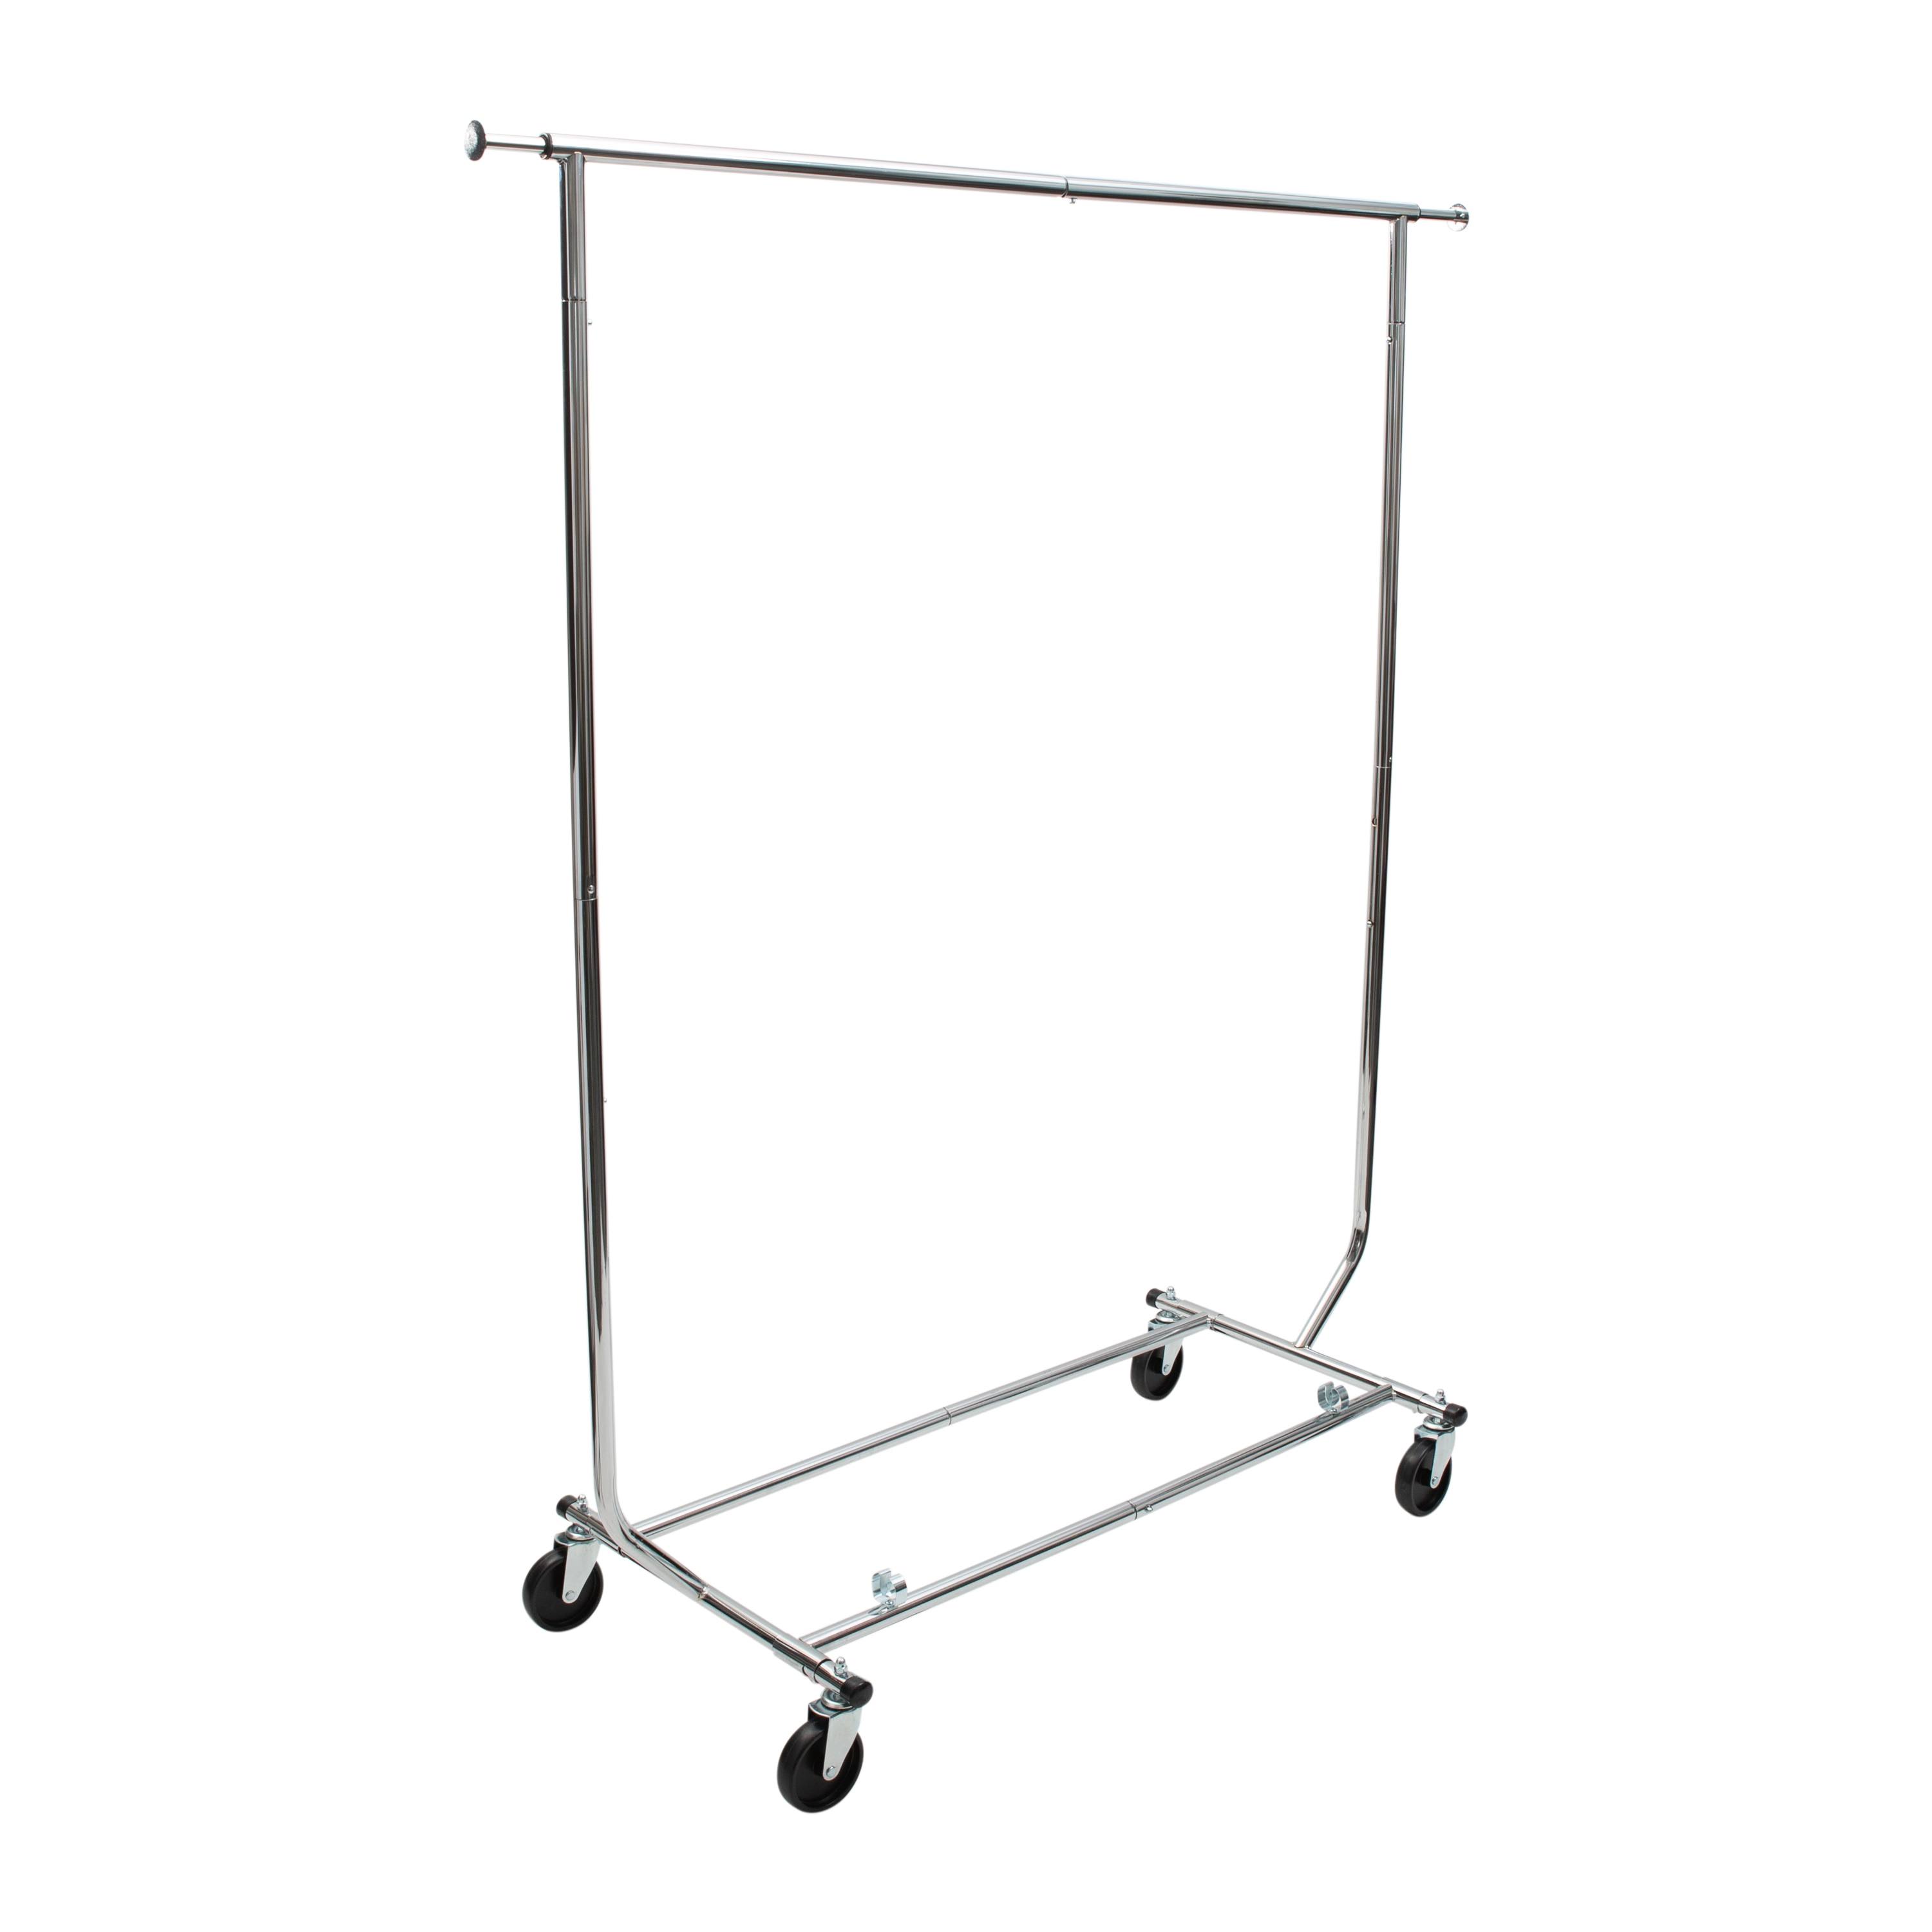 Collapsible Rack (Clothing Rack)